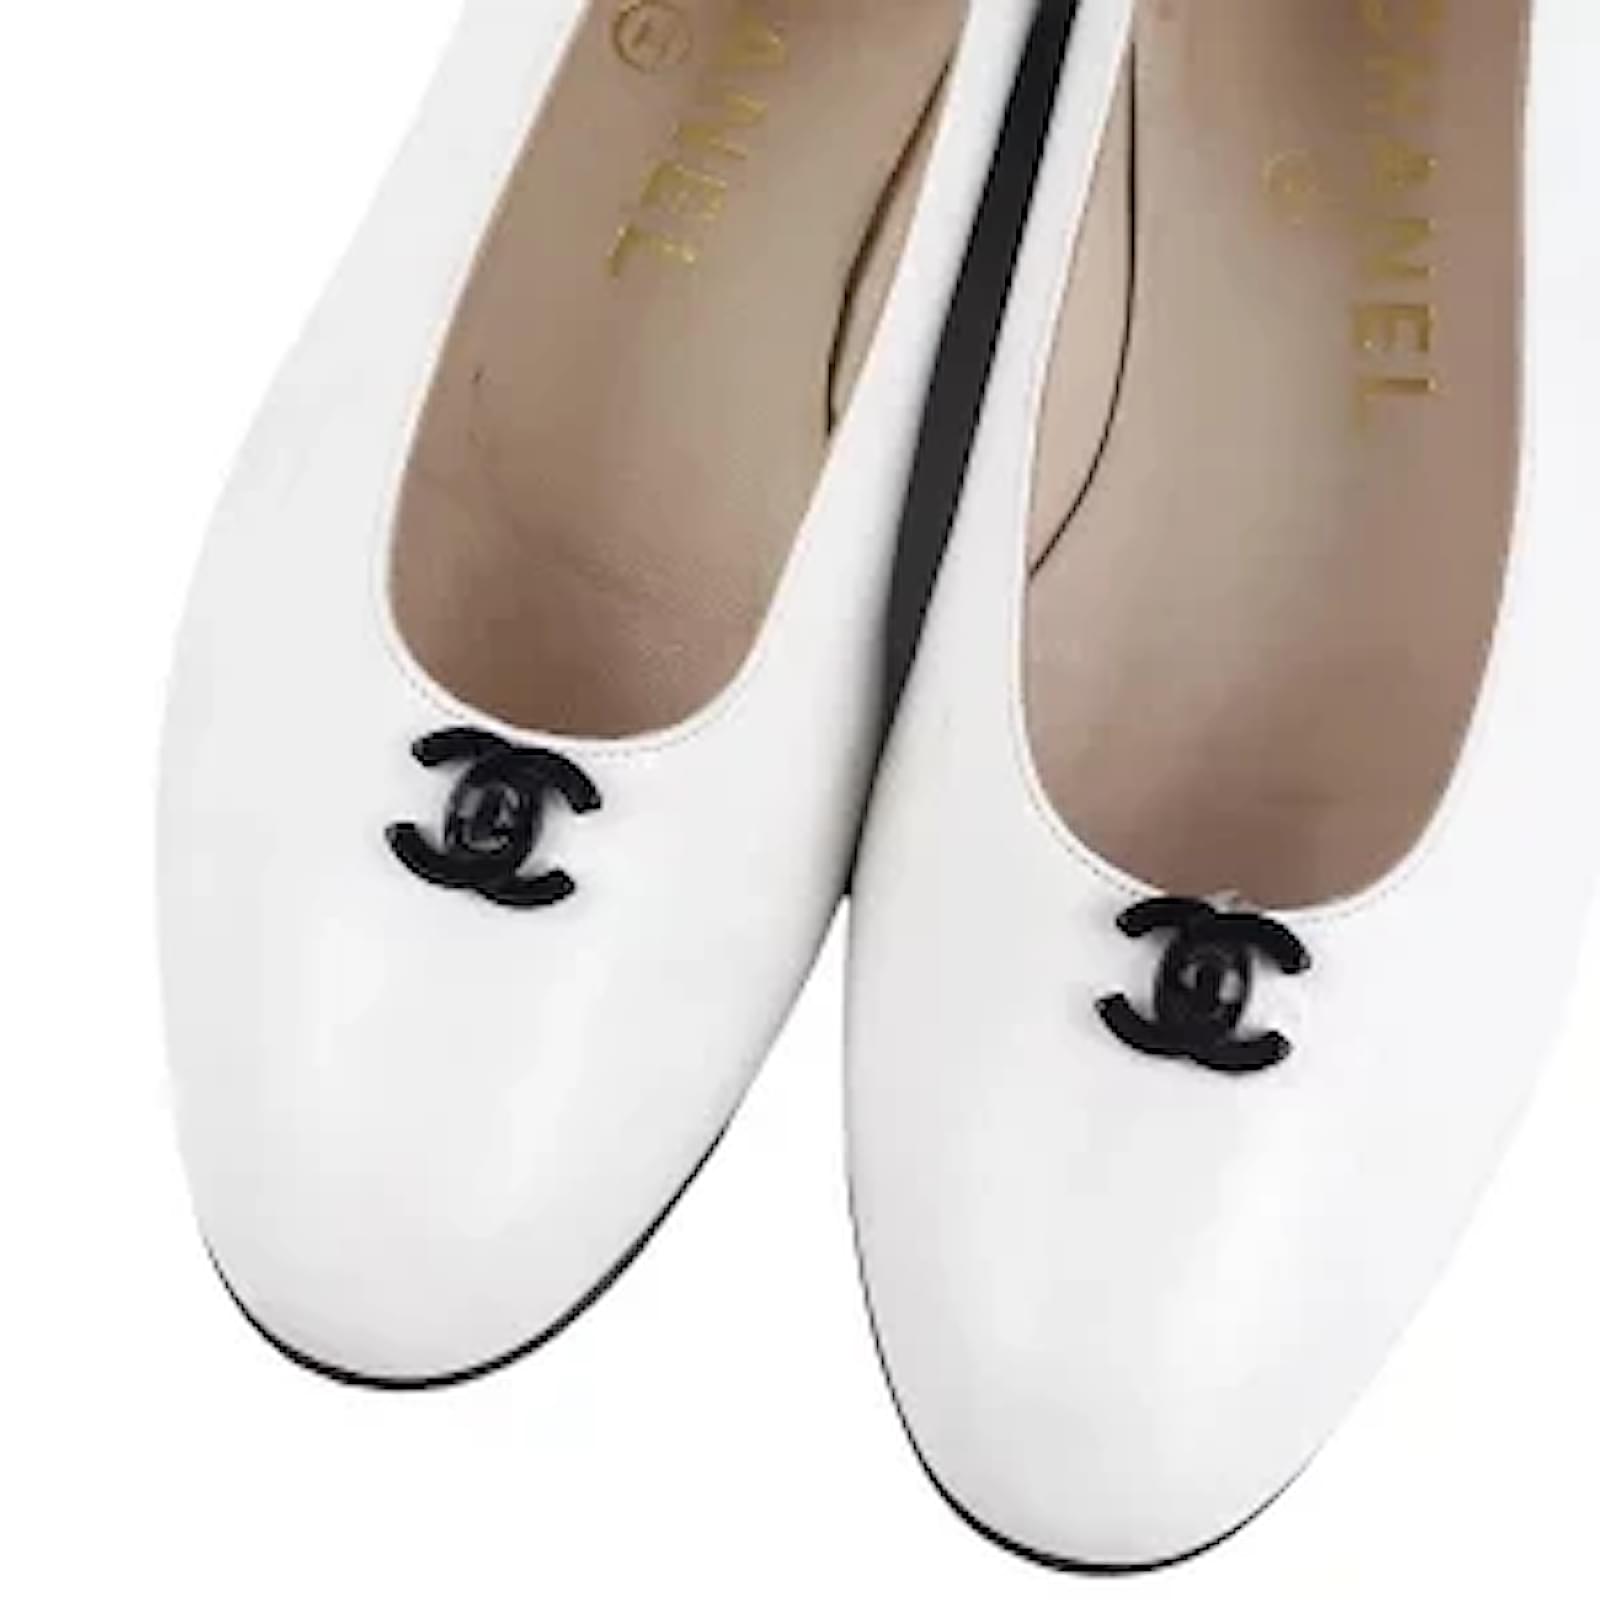 Used) Vintage Chanel CHANEL Coco Mark Turn Lock Flat Pumps 35 1/2 Leather  Shoes Shoes Women's White Women's Shoes ref.353664 - Joli Closet